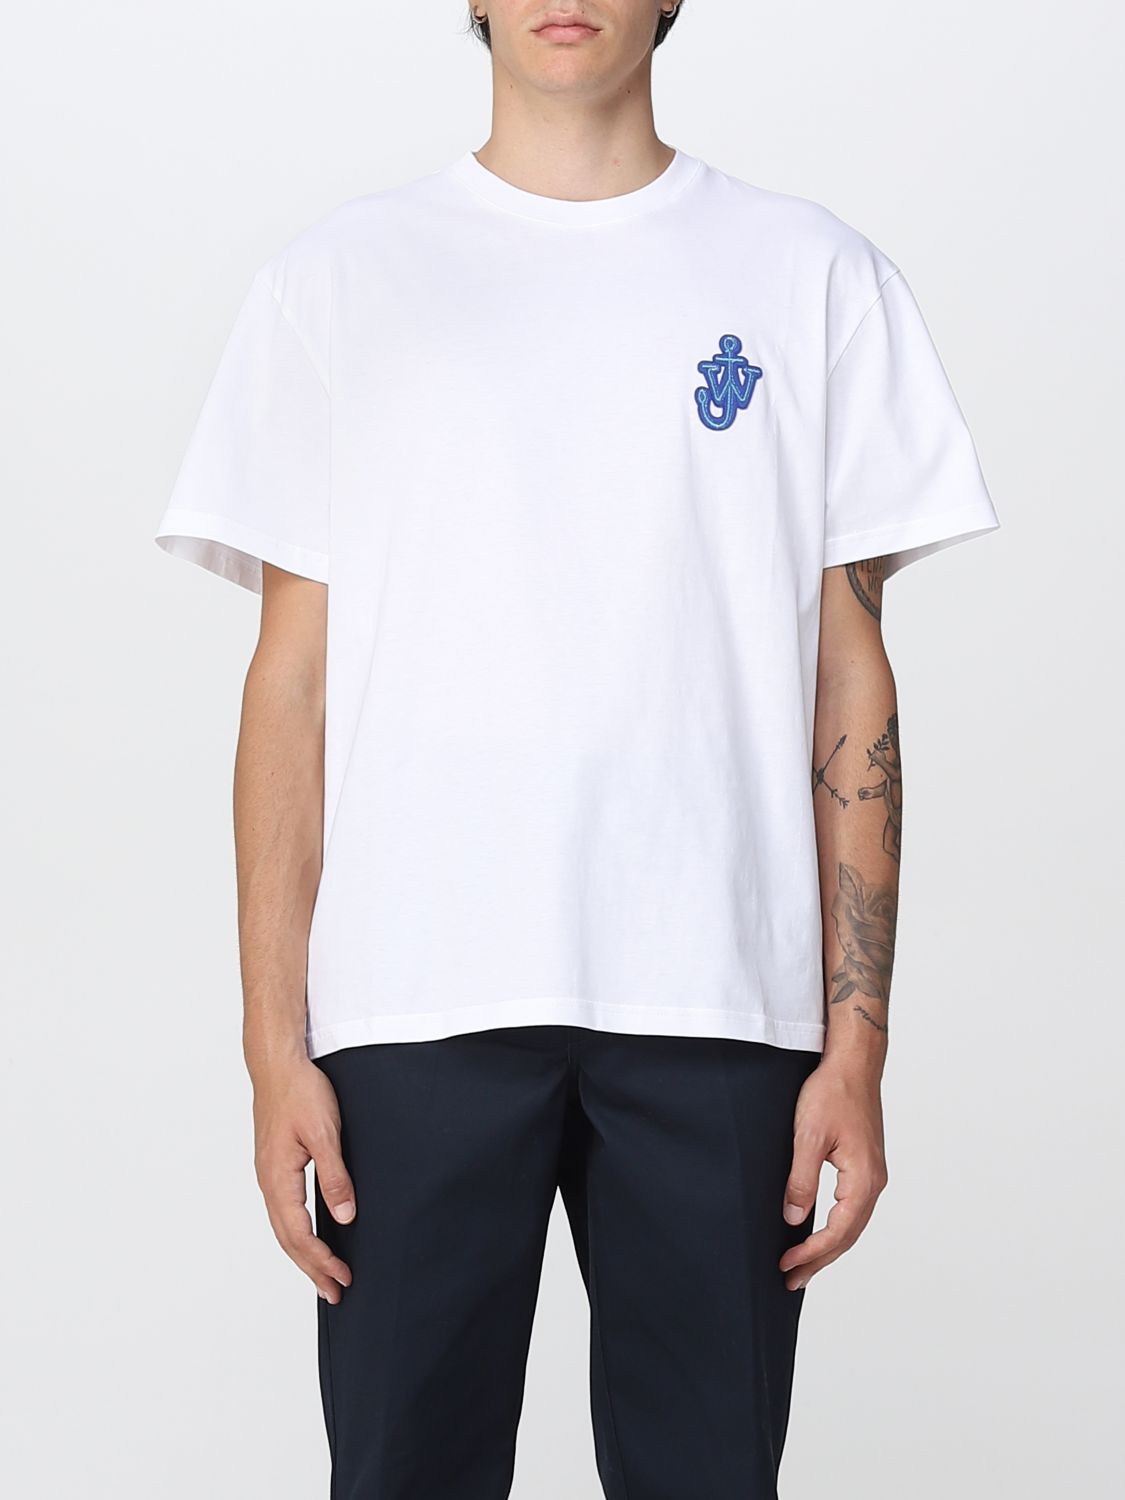 JW ANDERSON: t-shirt for man - White | Jw Anderson t-shirt JT0061PG0772 ...